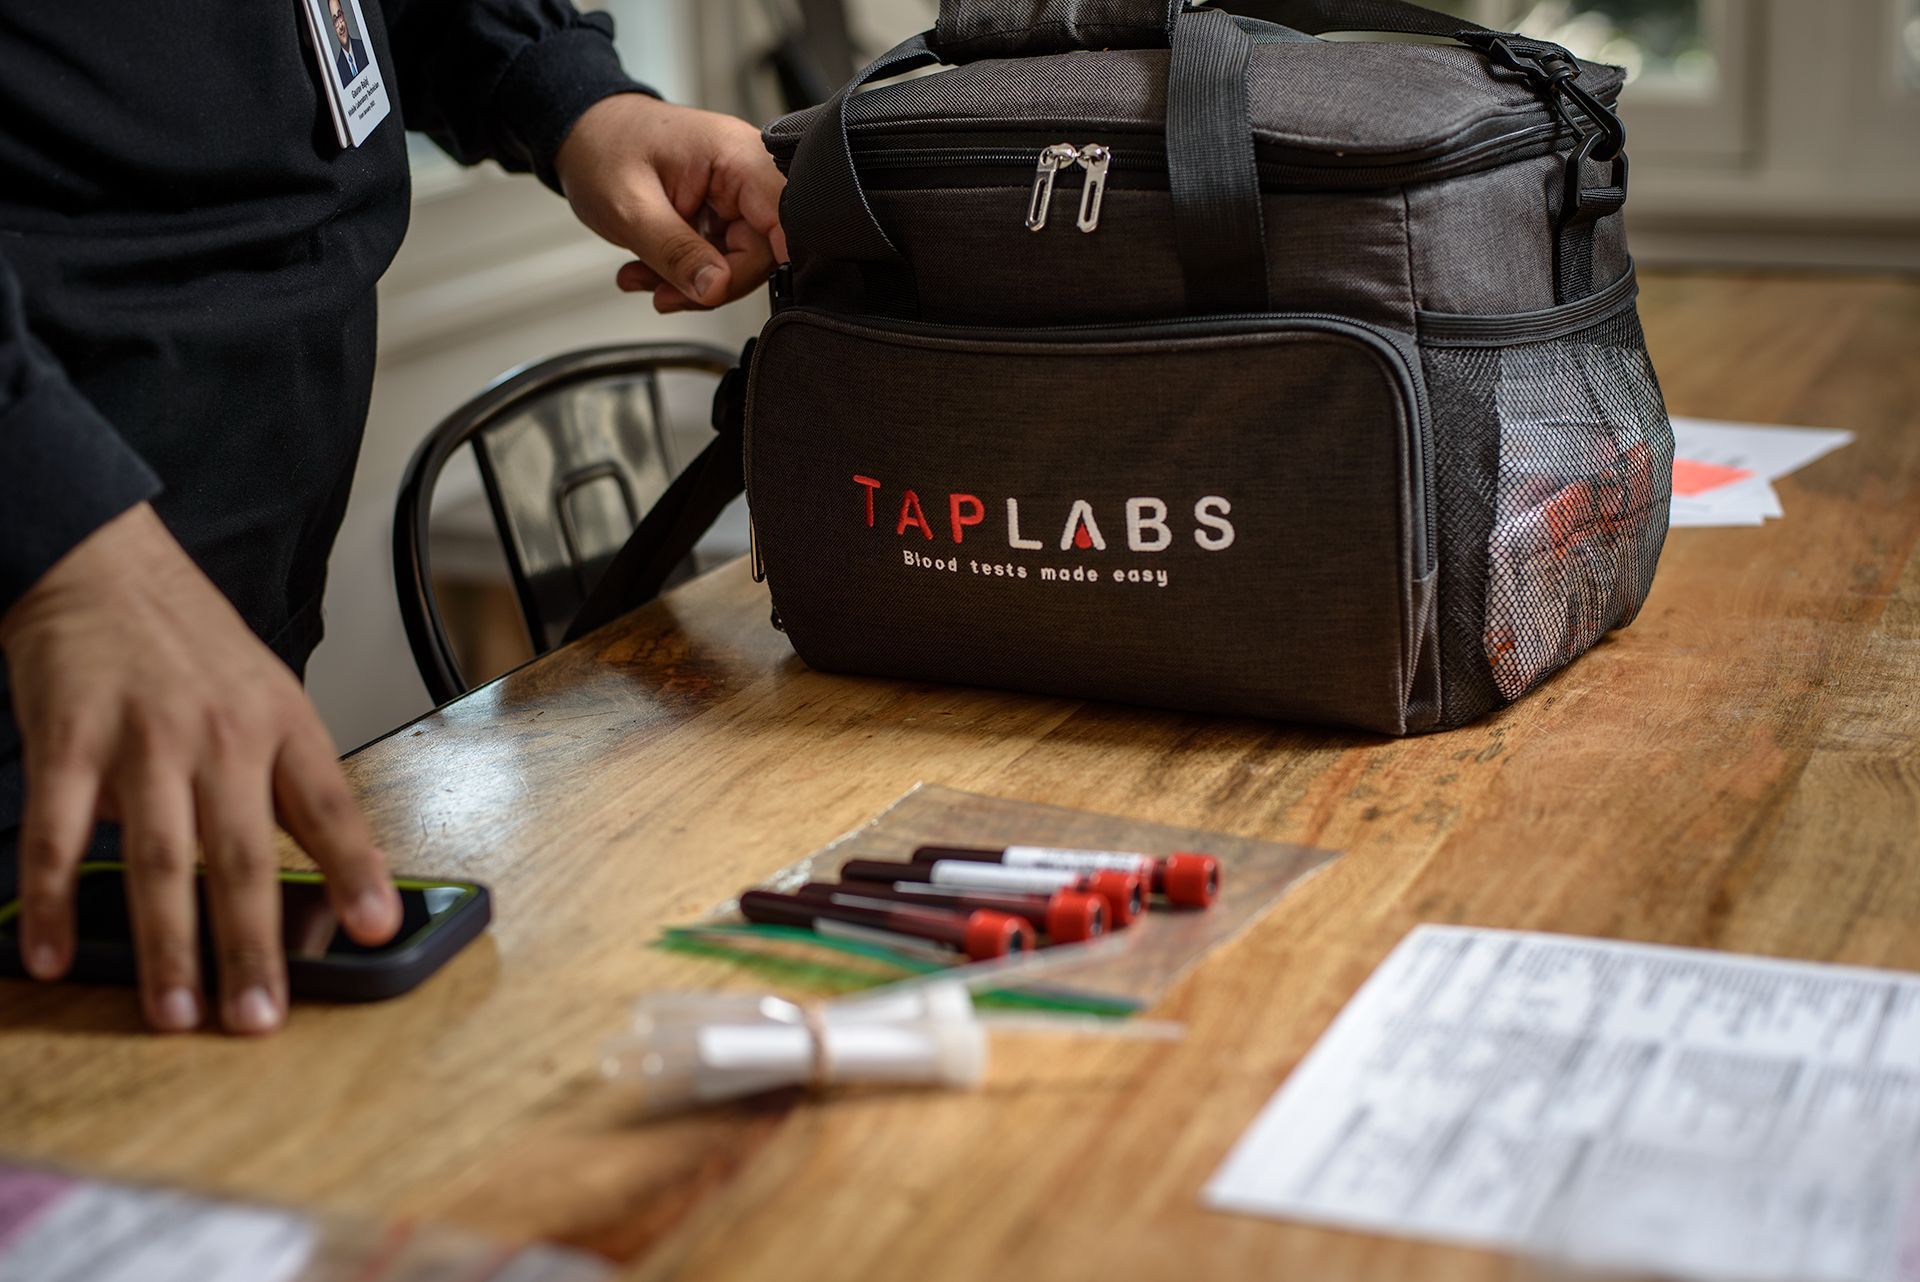 TapLabs provides private health clinics with access to on-demand mobile blood collection services